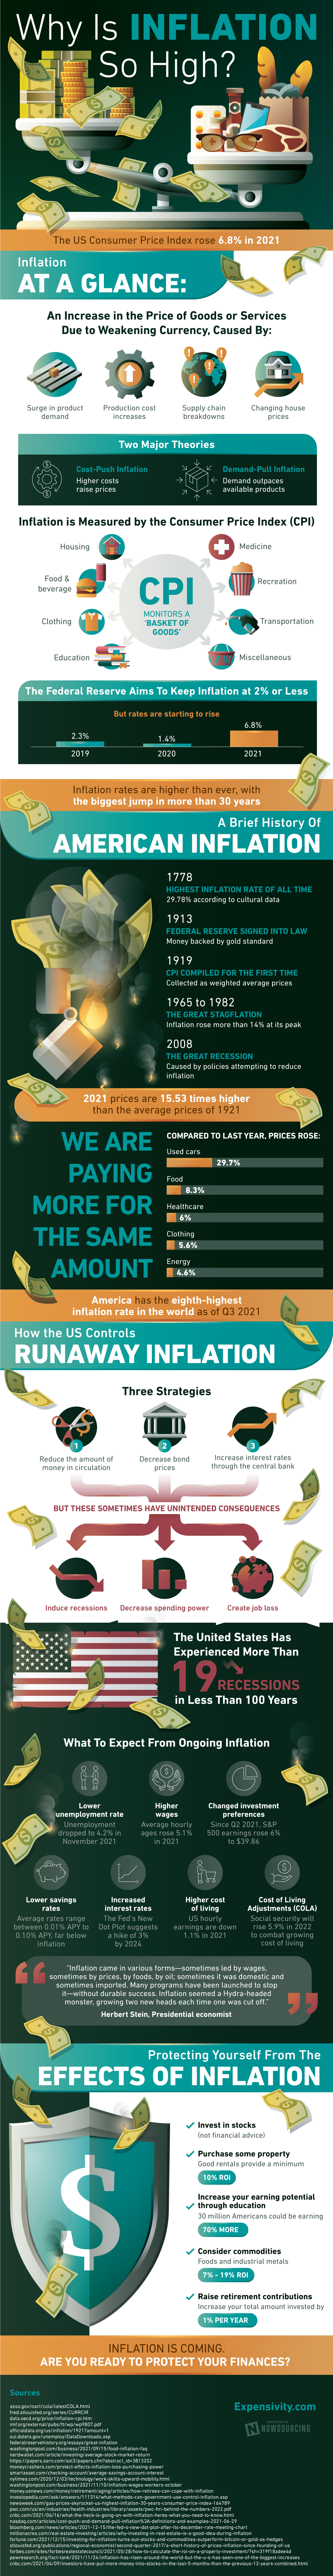 Why Is Inflation So High? [Infographic]